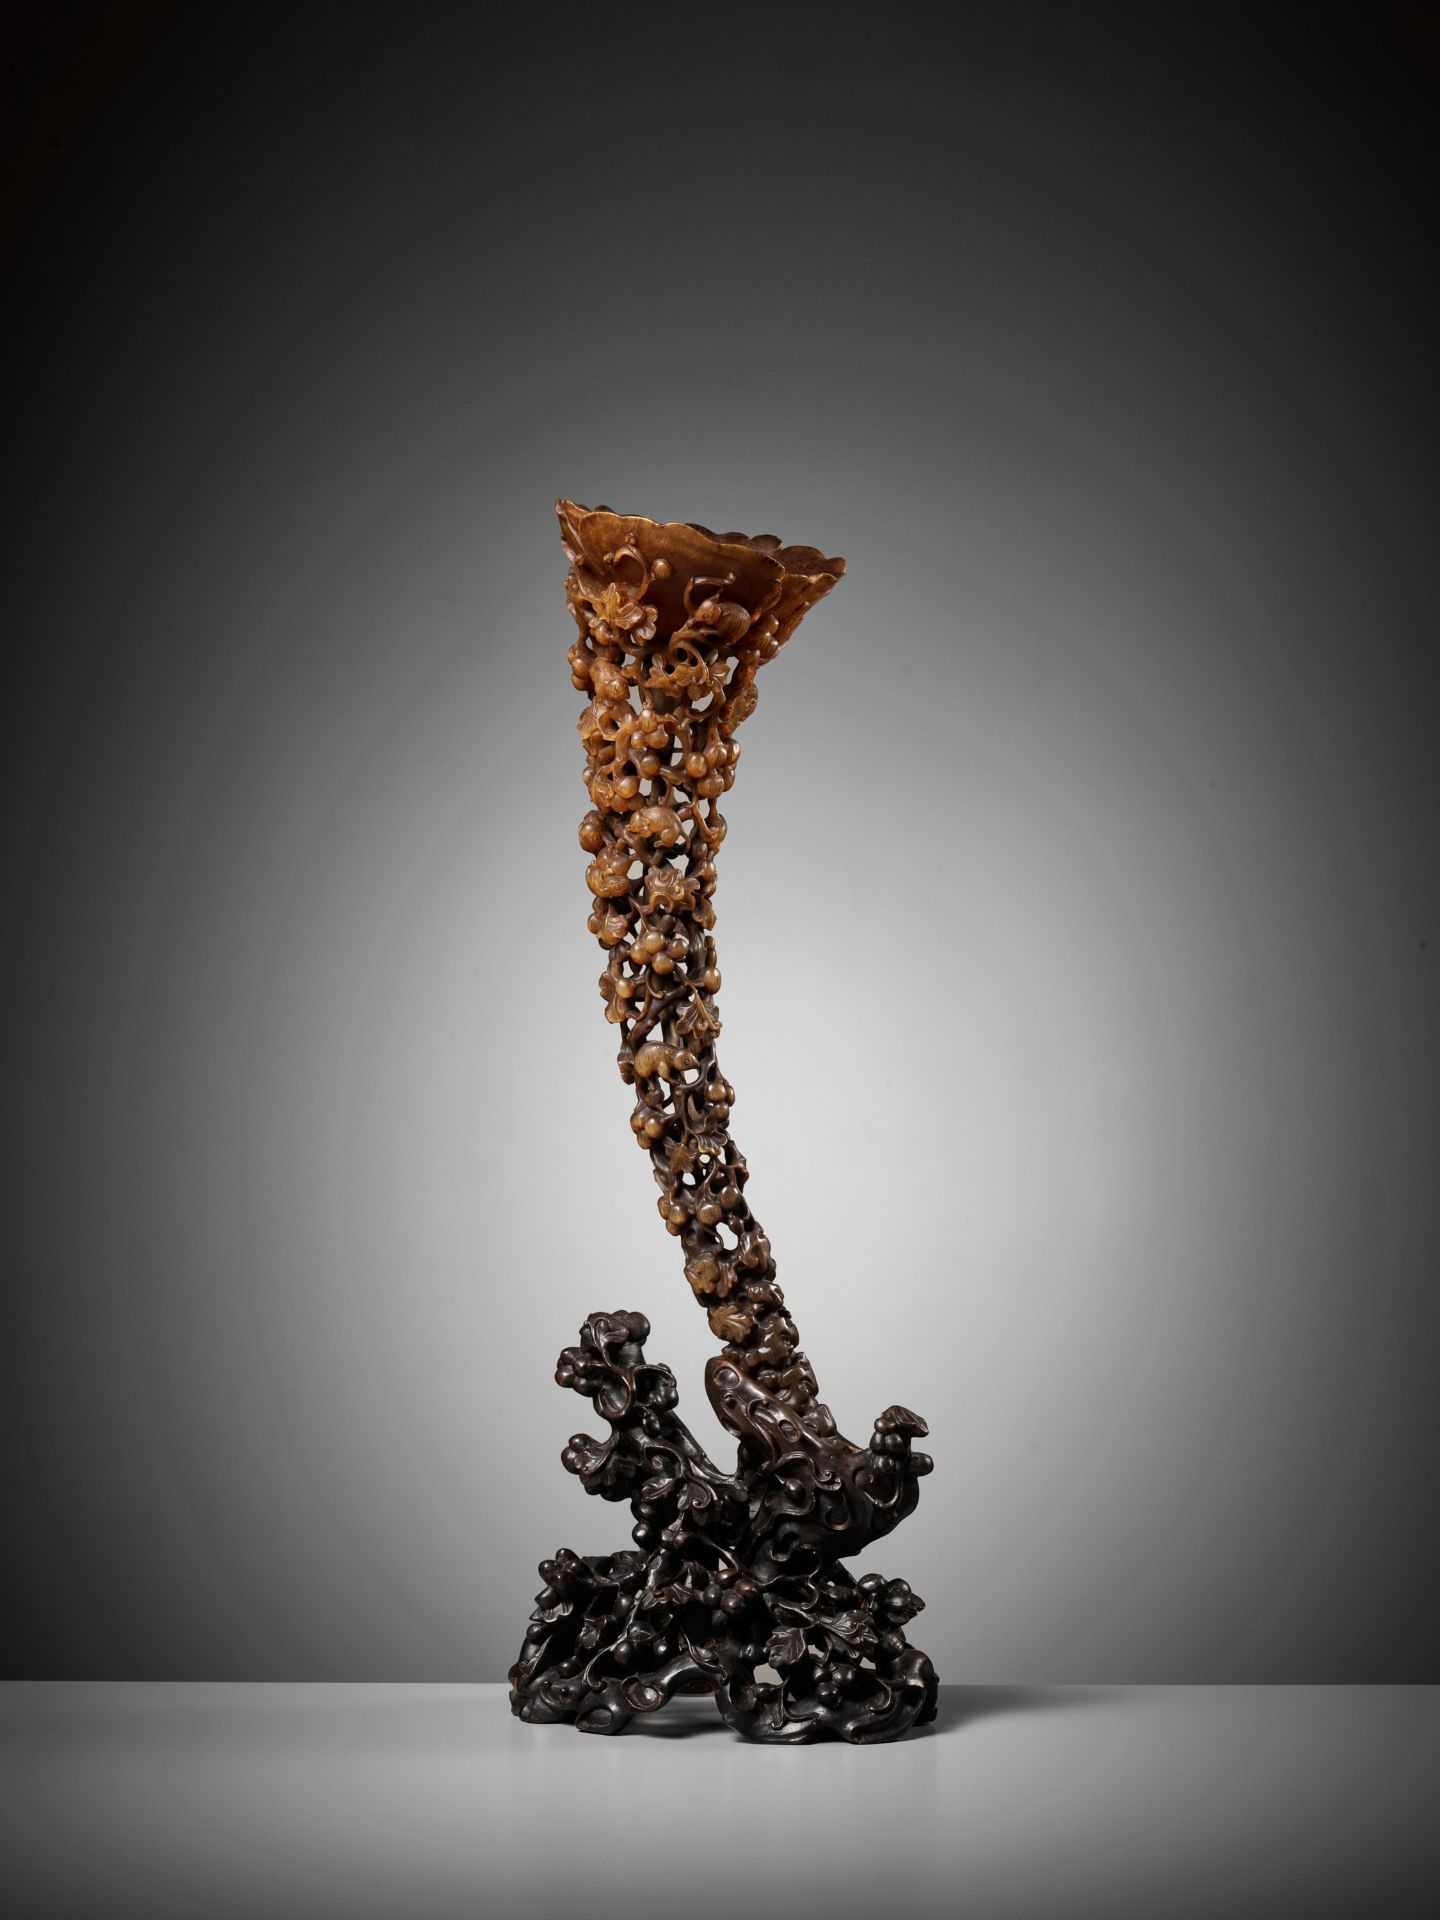 A LARGE FULL-TIP RHINOCEROS HORN CUP, 19TH CENTURY - Image 10 of 17